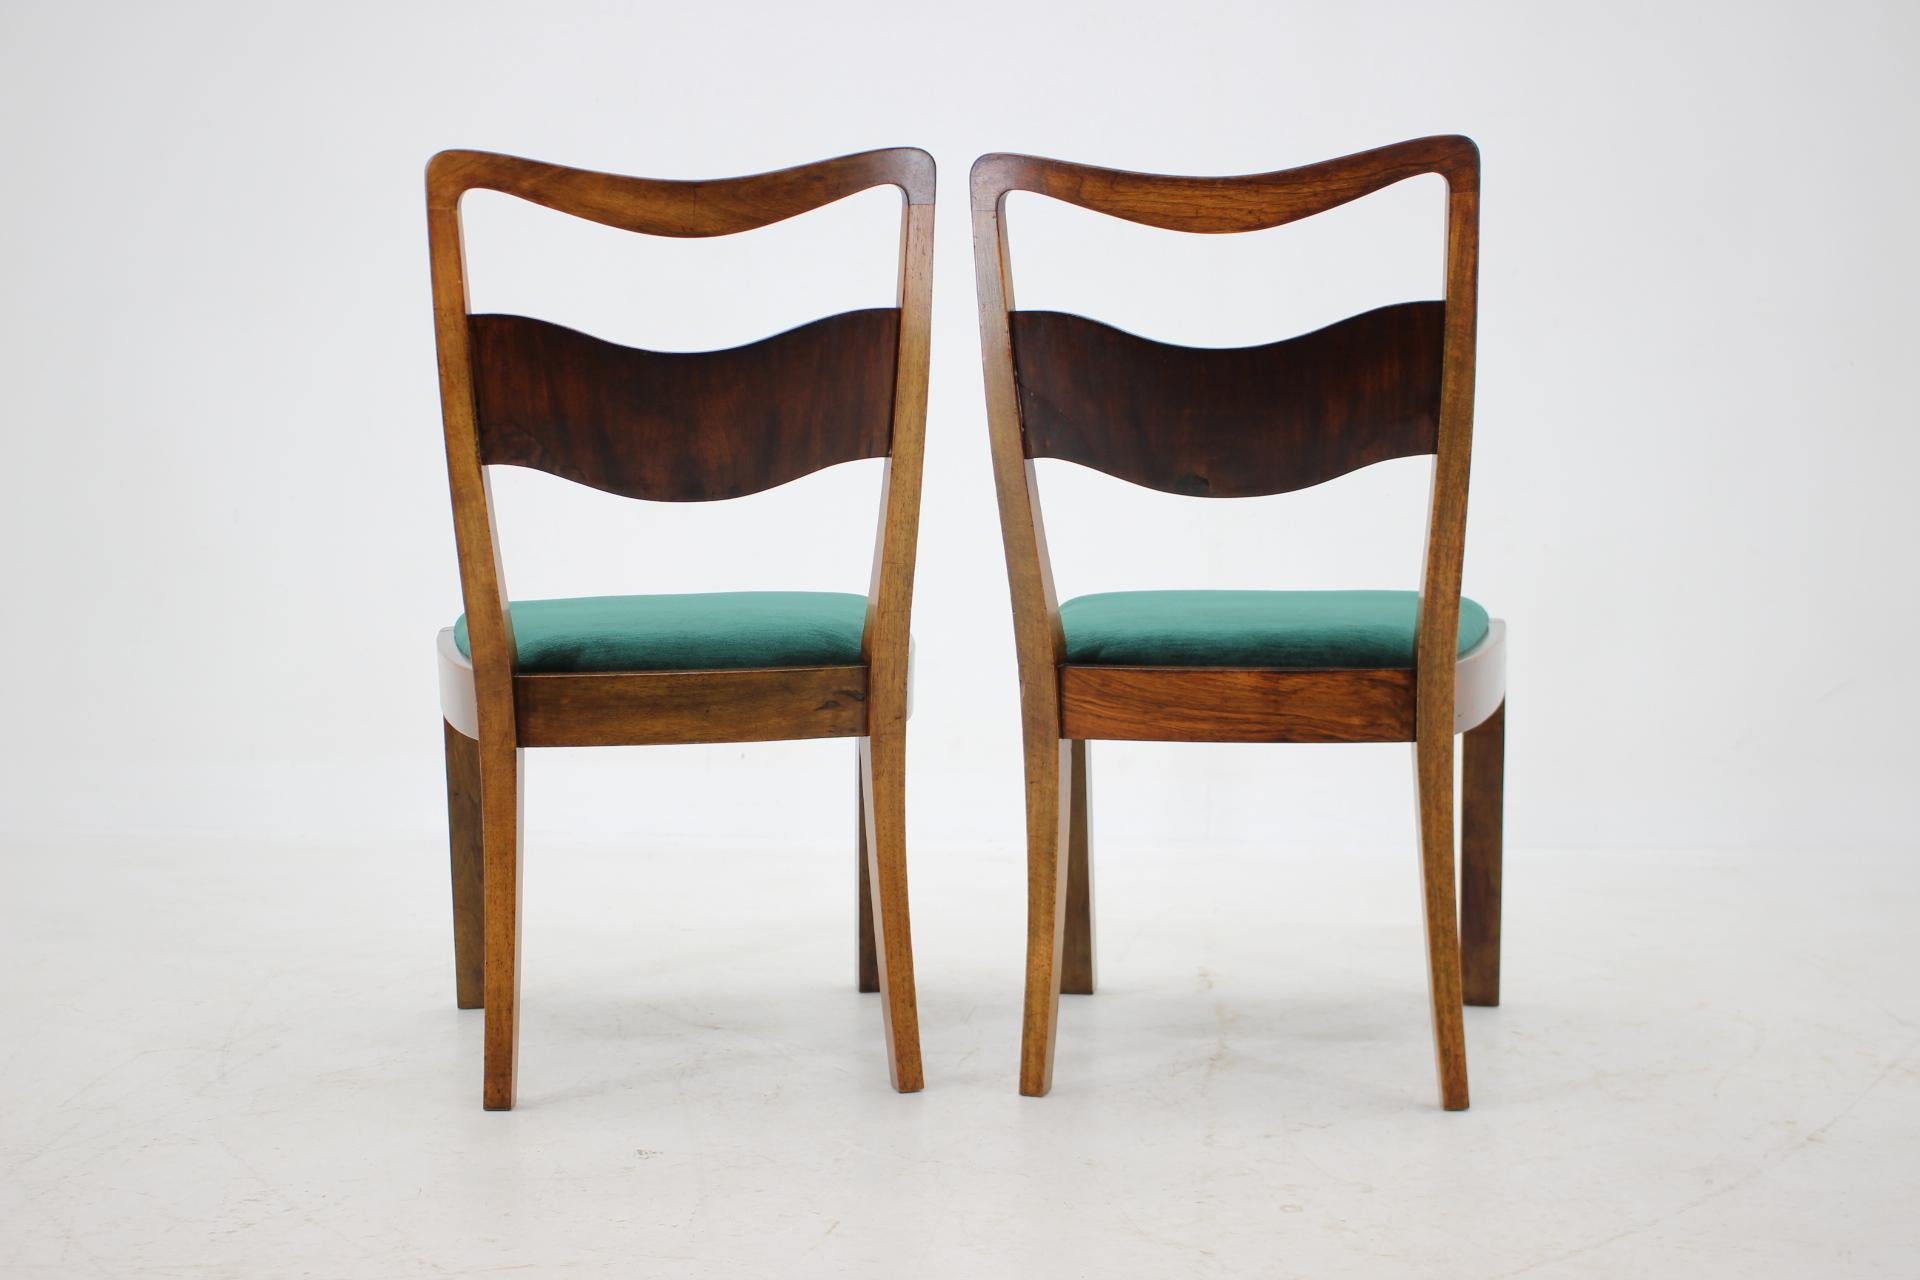 1930s Set of 4 Art Deco Dining Chairs, Czechoslovakia For Sale 5